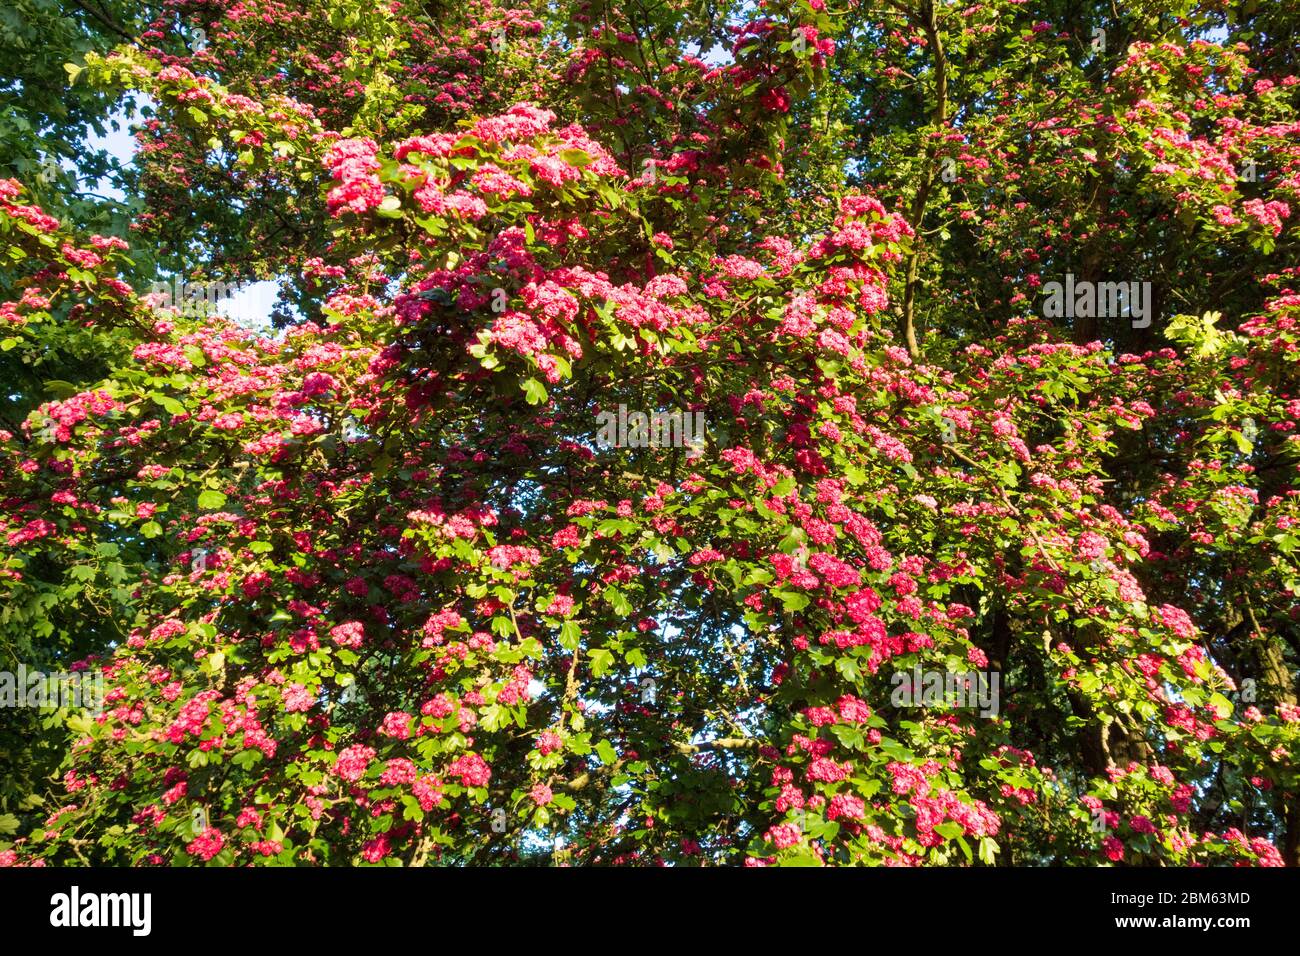 A blossoming pink Hawthorn tree (Paul's Scarlet) Stock Photo